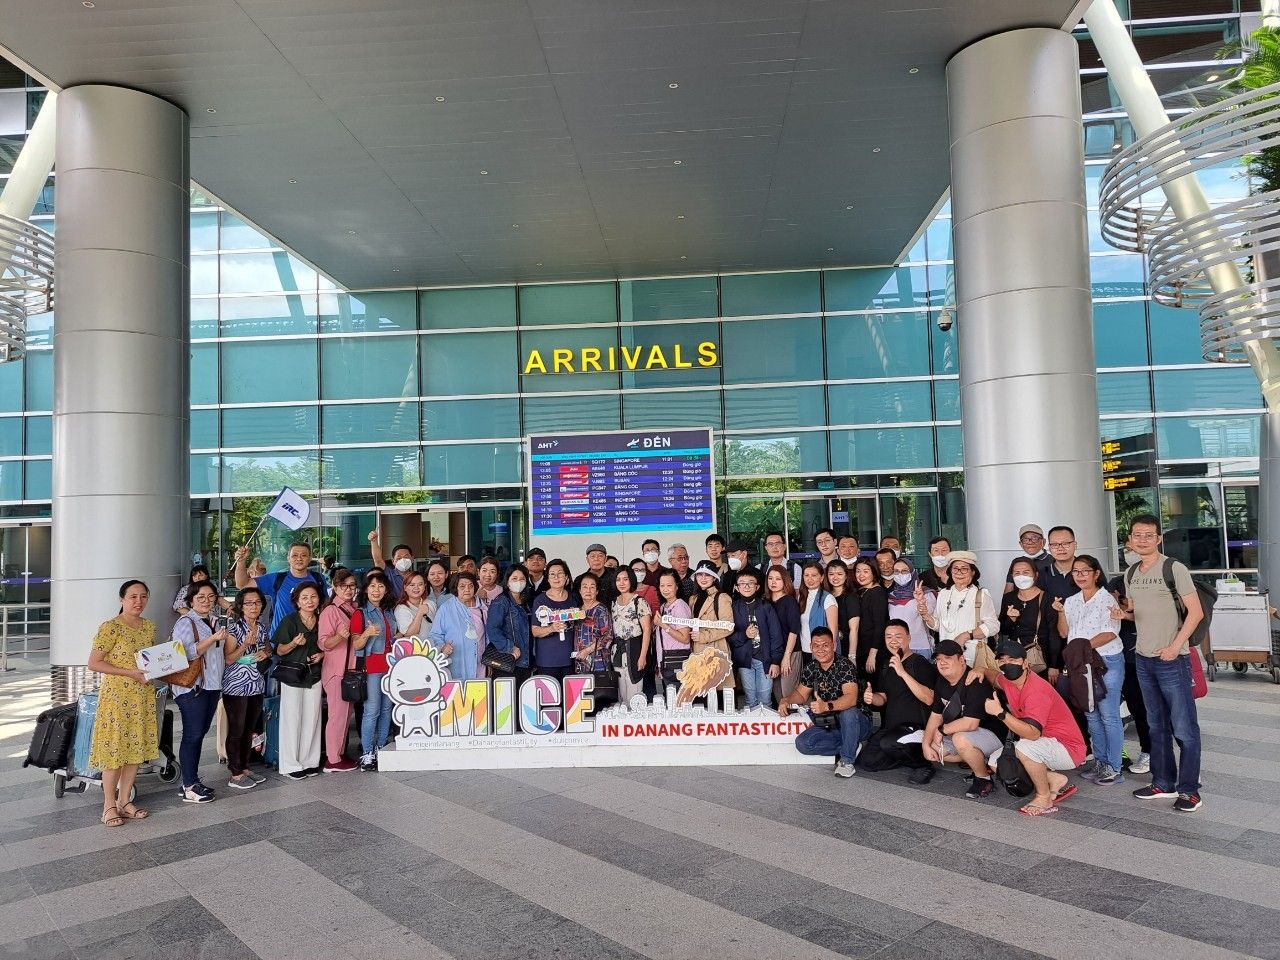 Indonesia group landed in Danang by SQ via Singapore, greeting by Danang Tourism Promotion 